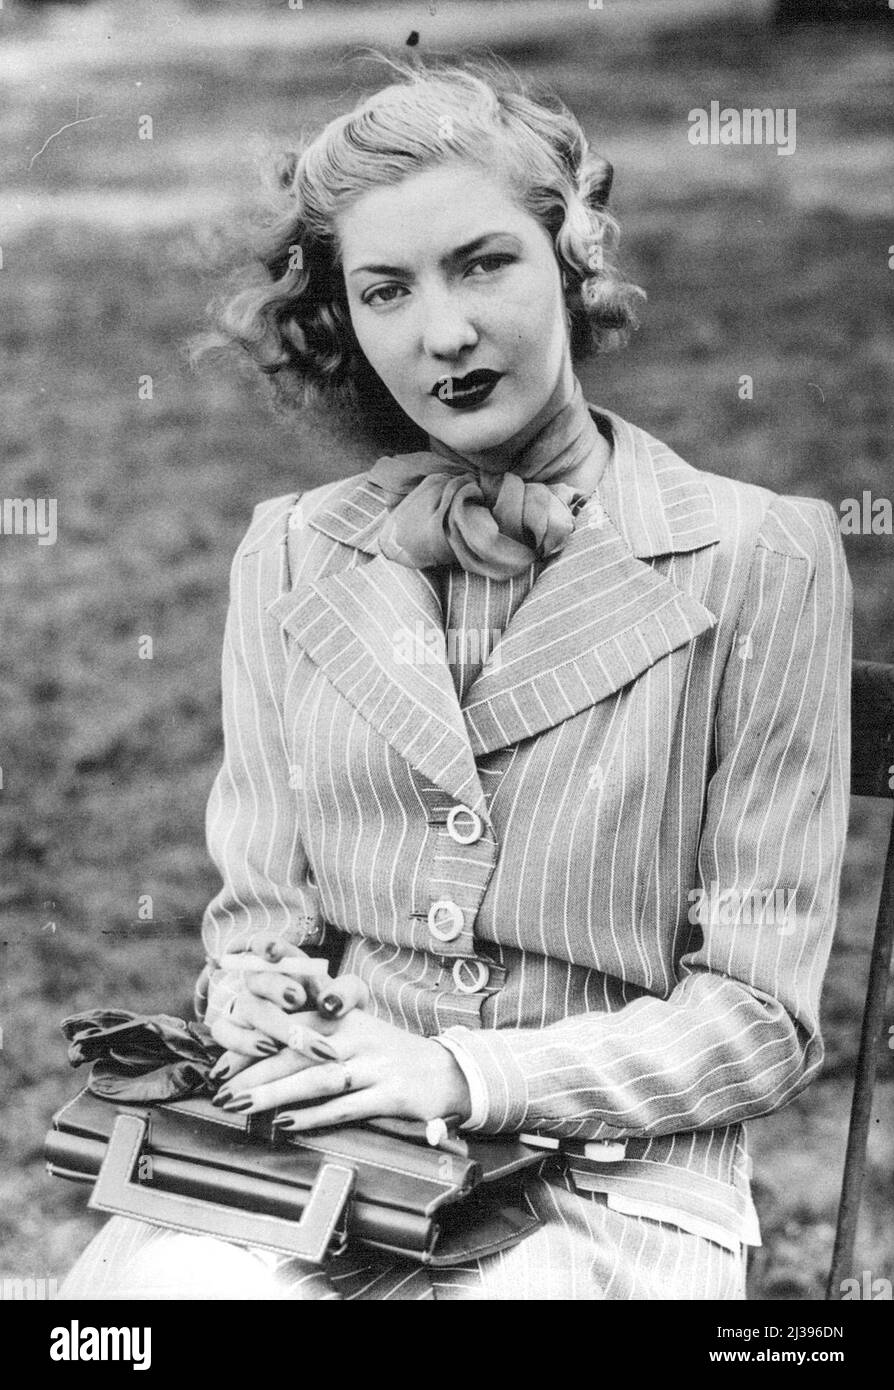 Girl Who Is 'Direct Successor To Great Garbo' Is Visiting London -- Corinne Luchaire photographed in ***** Park, London, while enjoying a quiet smoke. Described by Mary Pickford as 'the direct successor to Greta Garbo', Corinne Luchaire, beautiful blonde French film actress of 17 years, is making a secret stay in London with her father, mother and brother. Every producer in London and Hollywood who has ***** her has tried to sign a contract with Corinne ***** to her success in the French film 'Prison without Bars'. May 23, 1938. Stock Photo